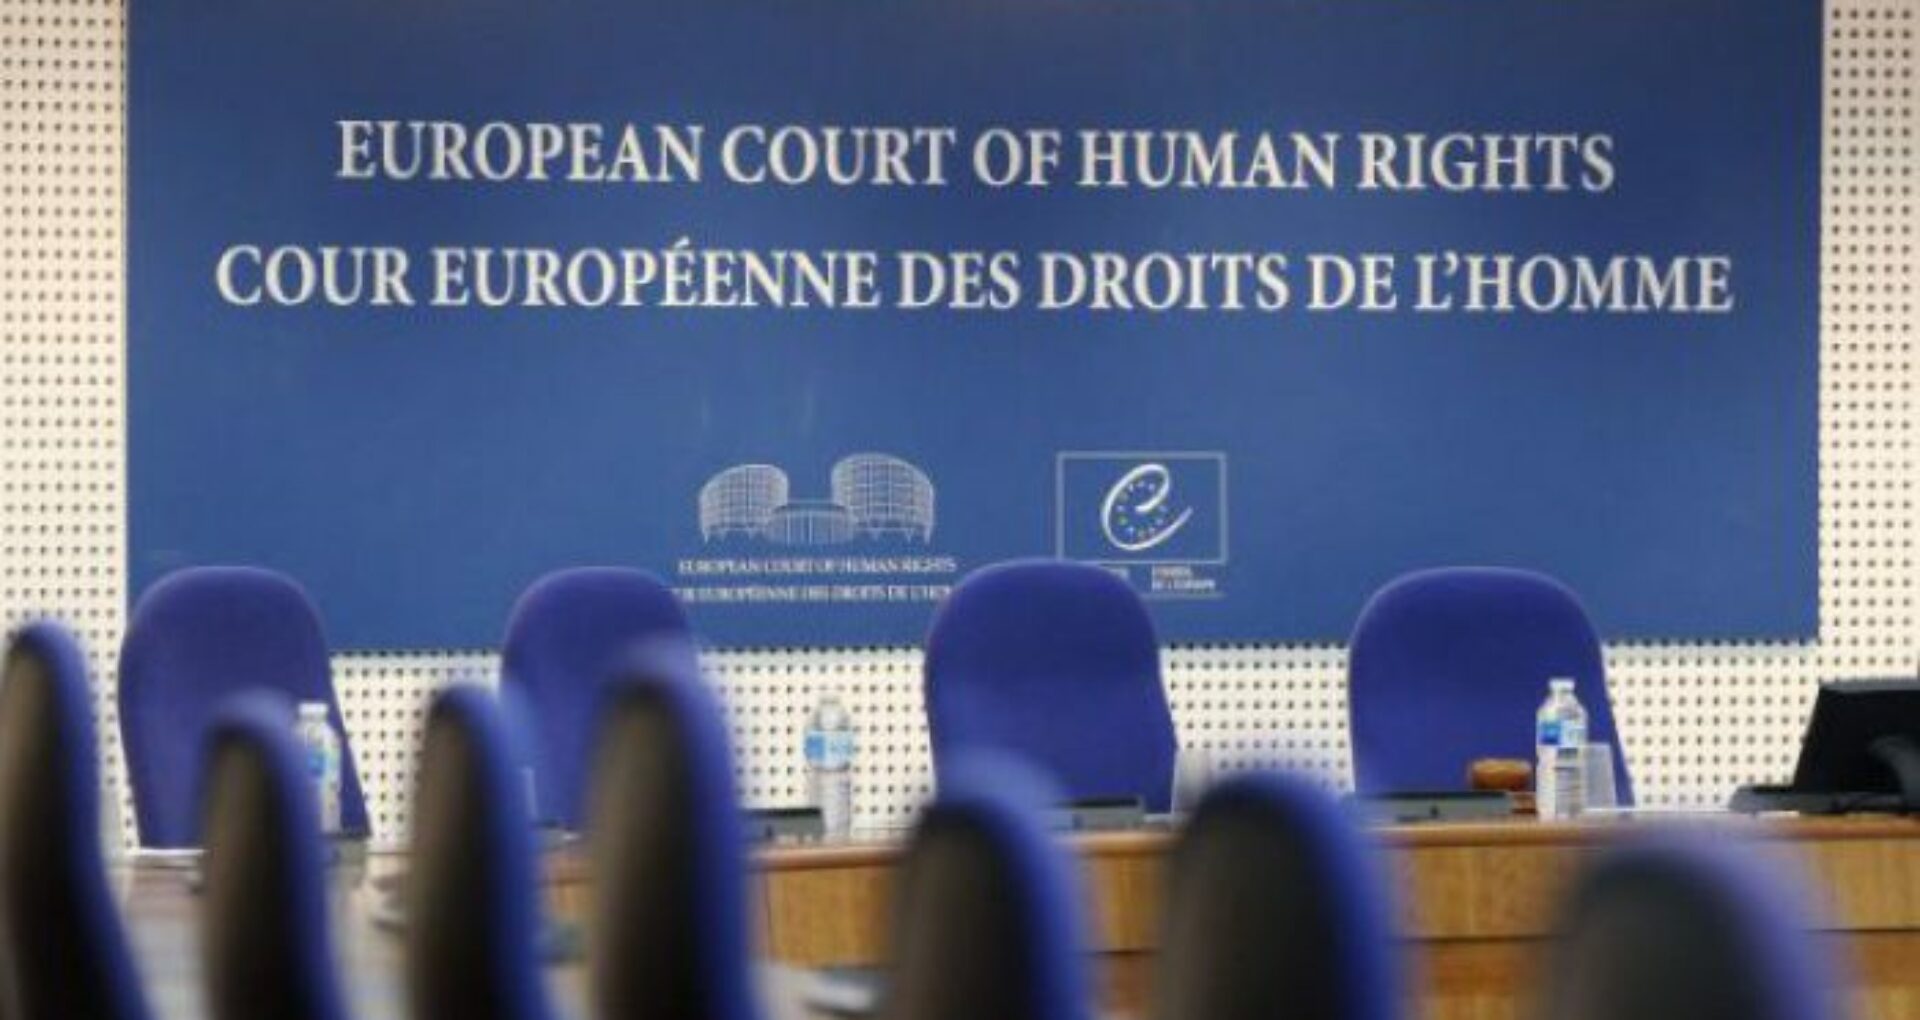 ECtHR Rules Against Moldova and Russia in Six Human Rights Cases From the Transnistrian Region